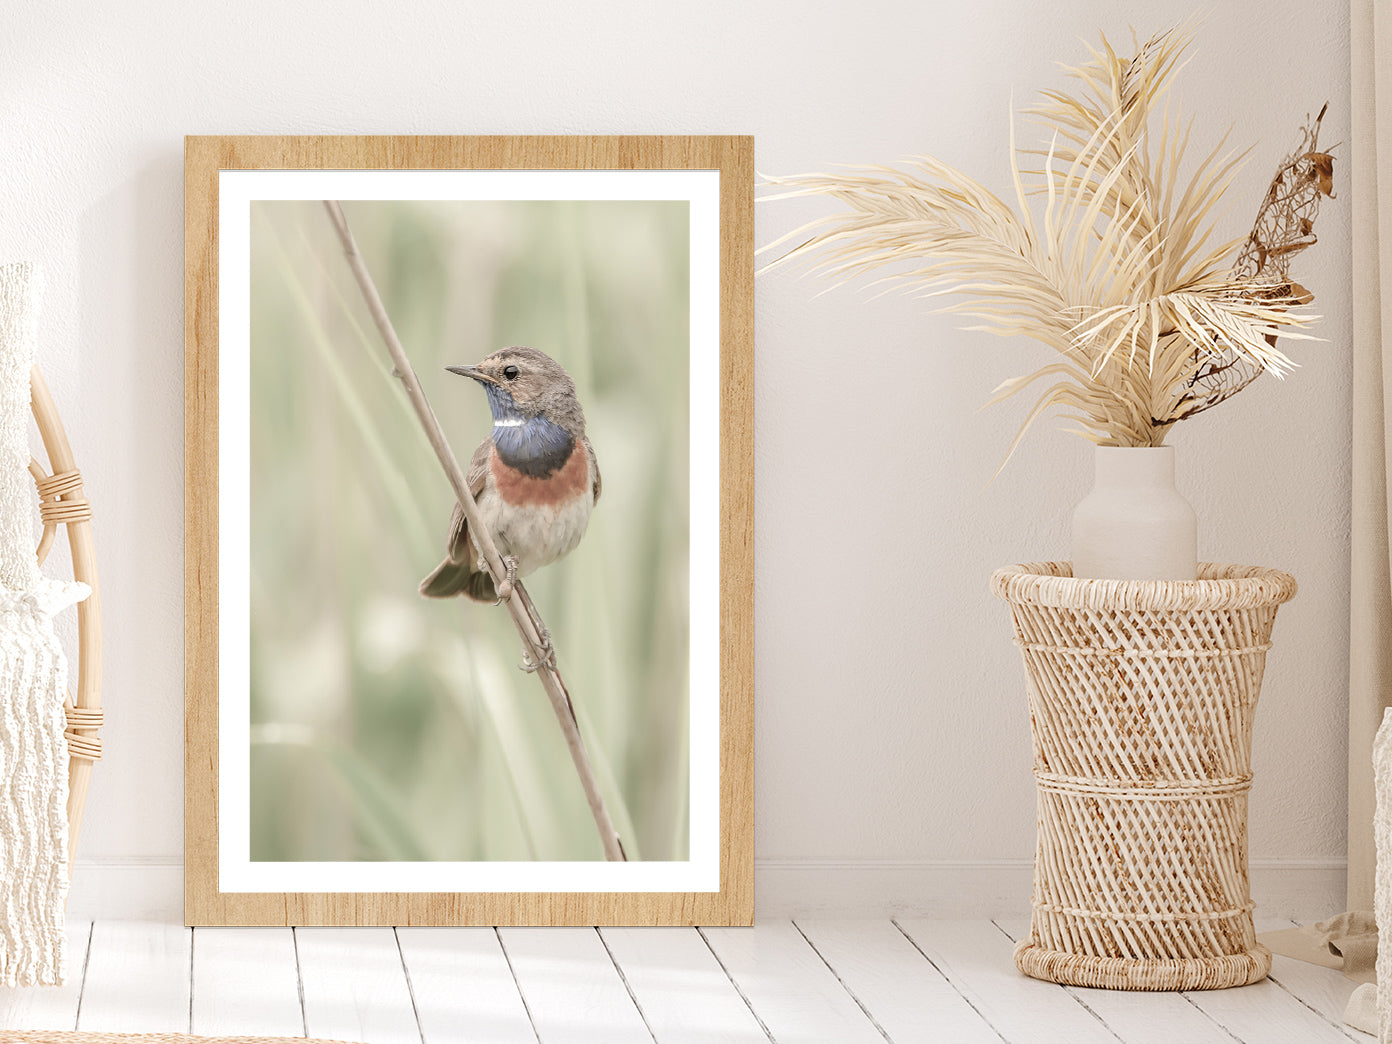 Bluethroat Bird on Branch Photograph Glass Framed Wall Art, Ready to Hang Quality Print With White Border Oak